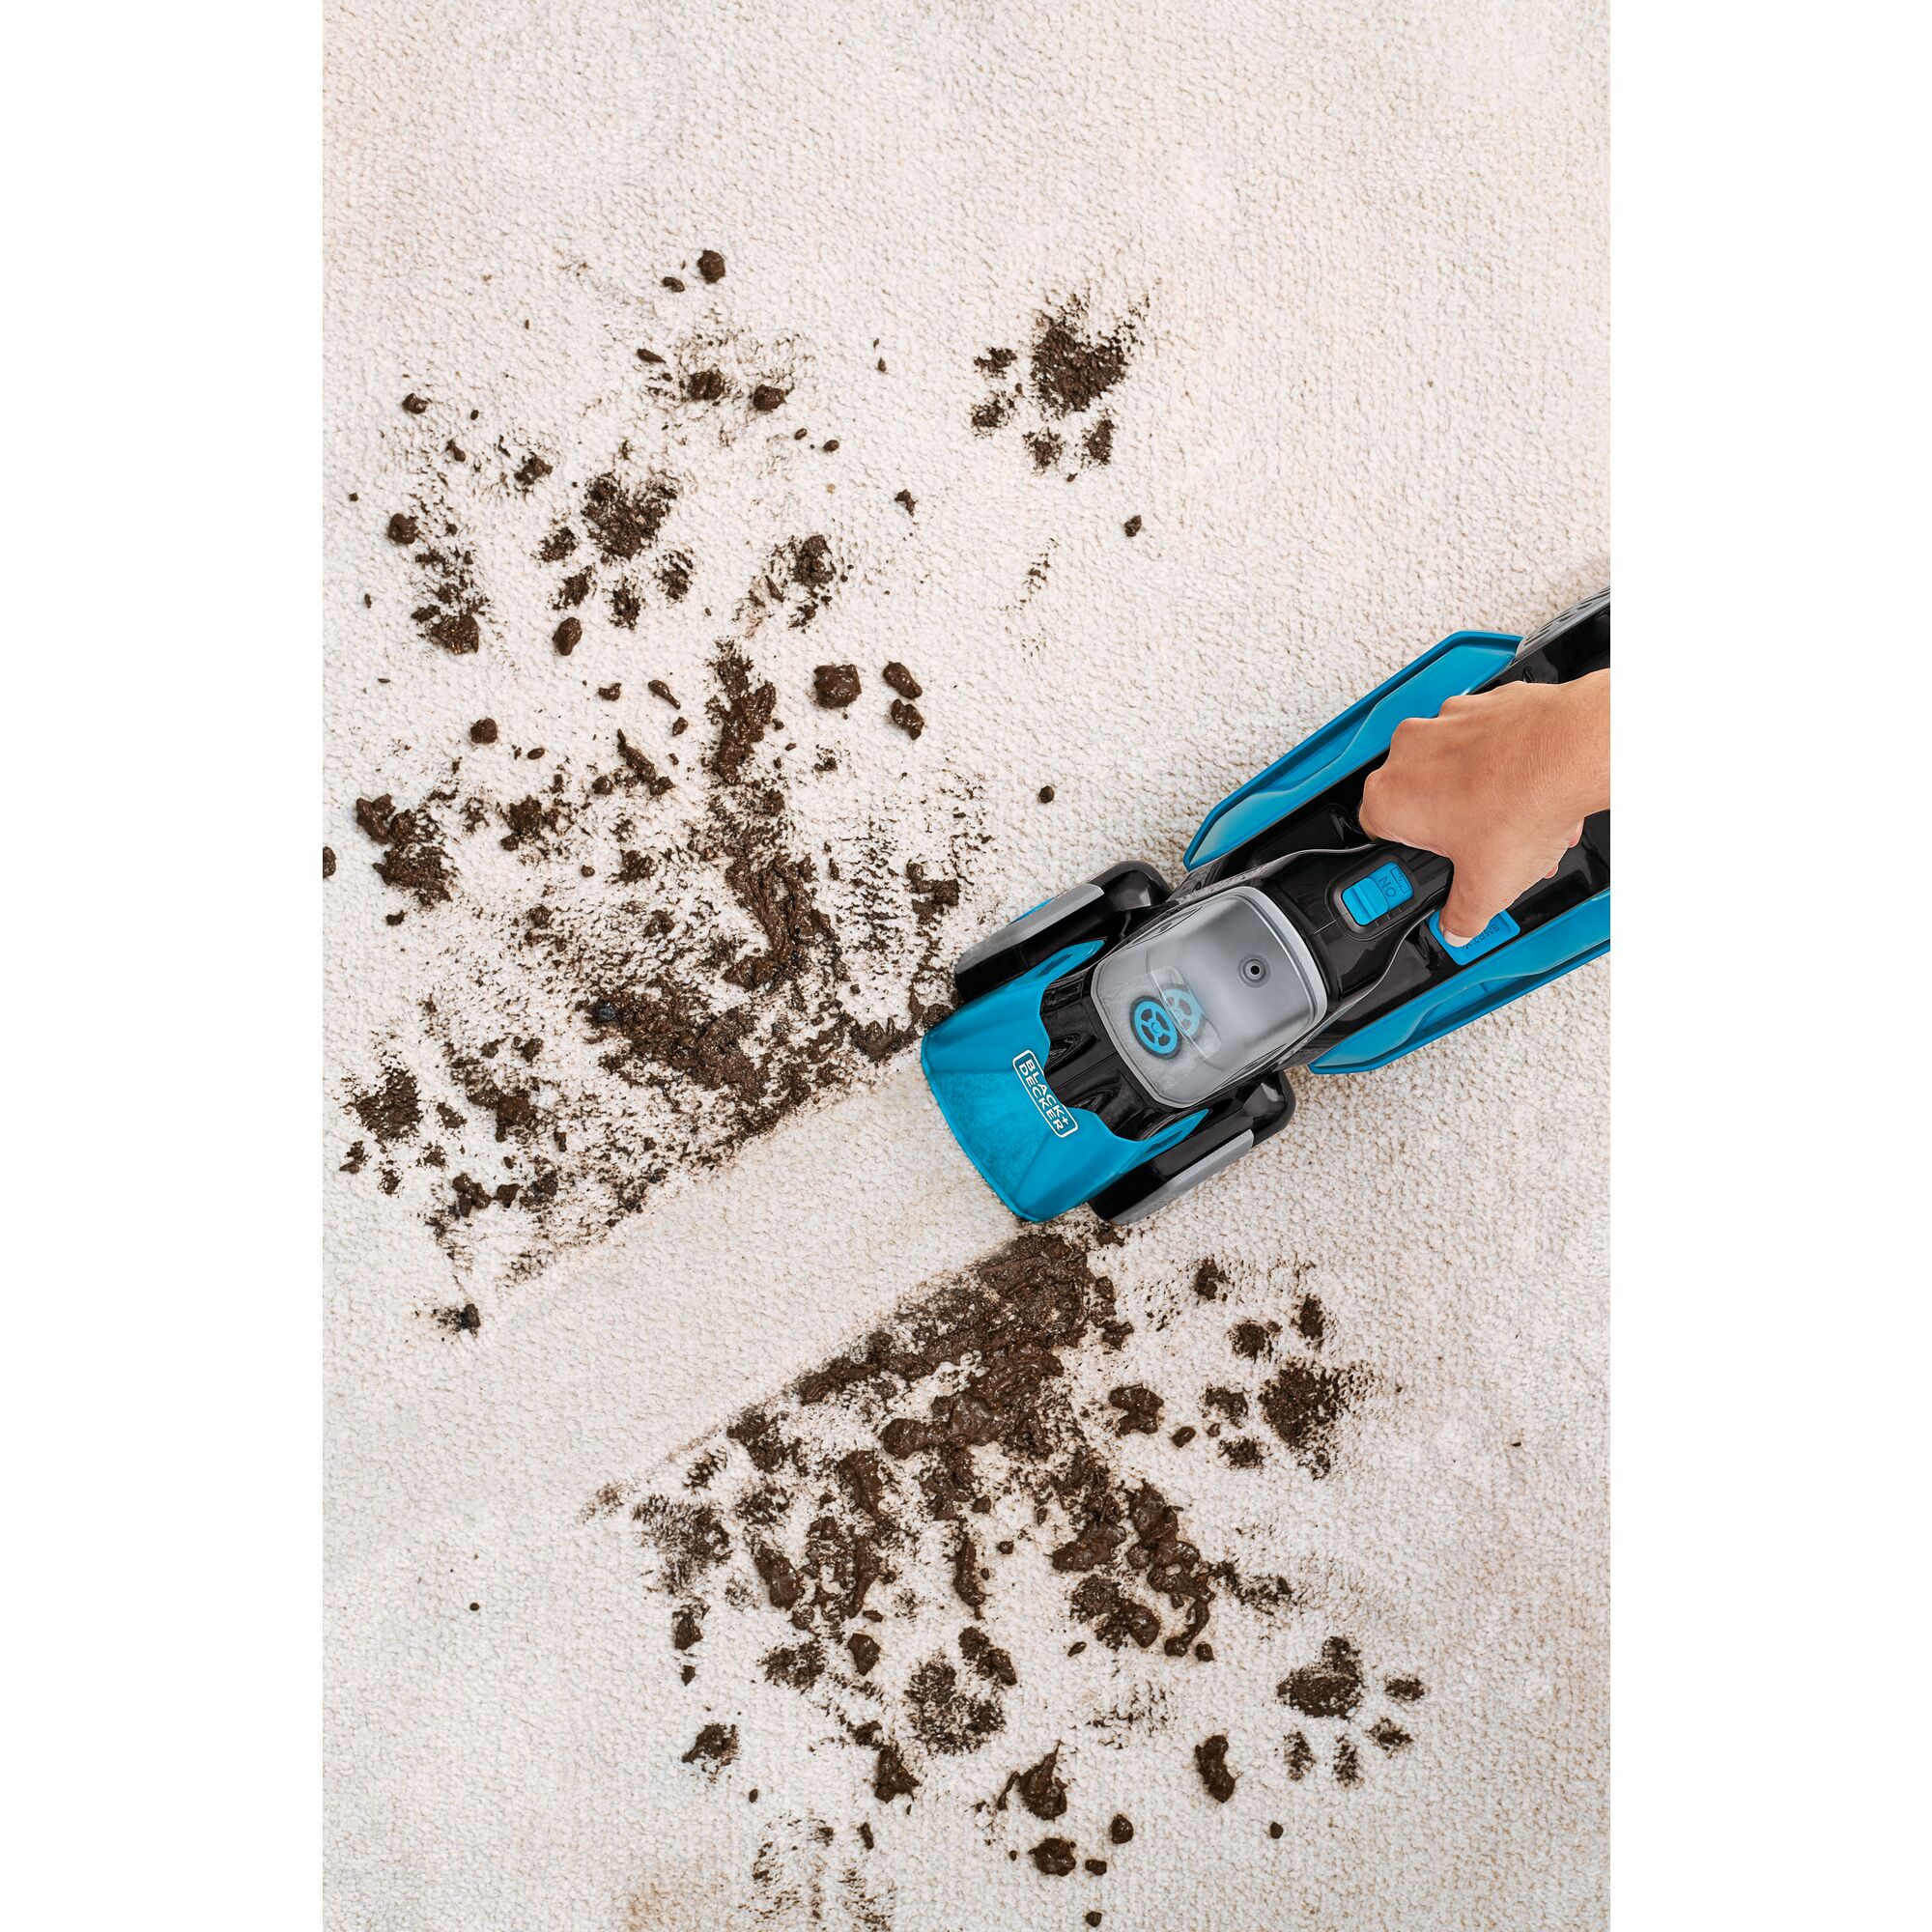 spill buster Cordless Spill plus Spot Cleaner with Powered Scrub Brush being used to clean mud off of carpet.